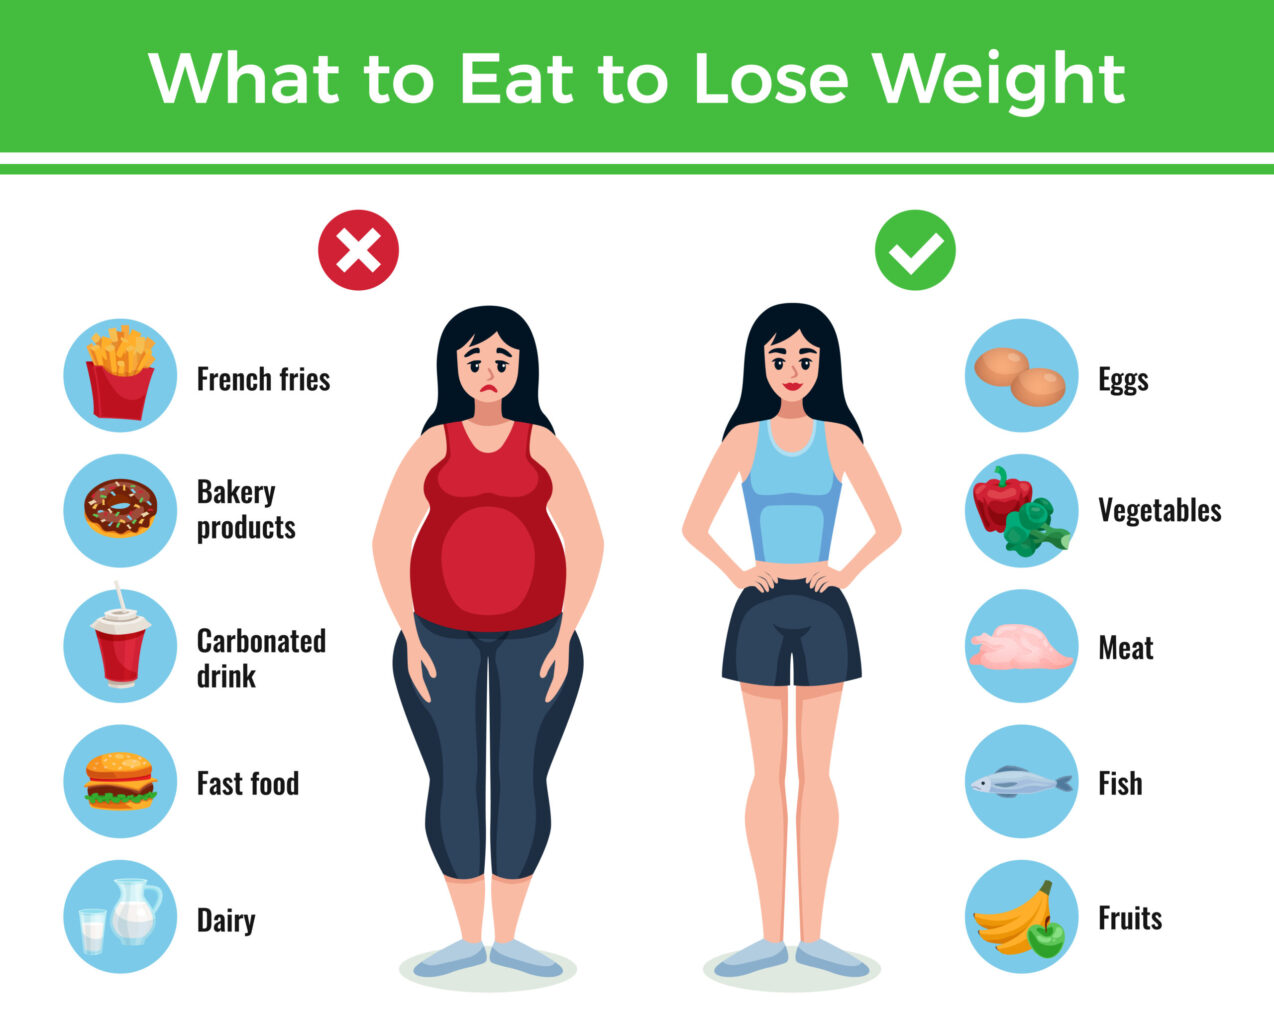 there are additional tips in this picture for weight loss